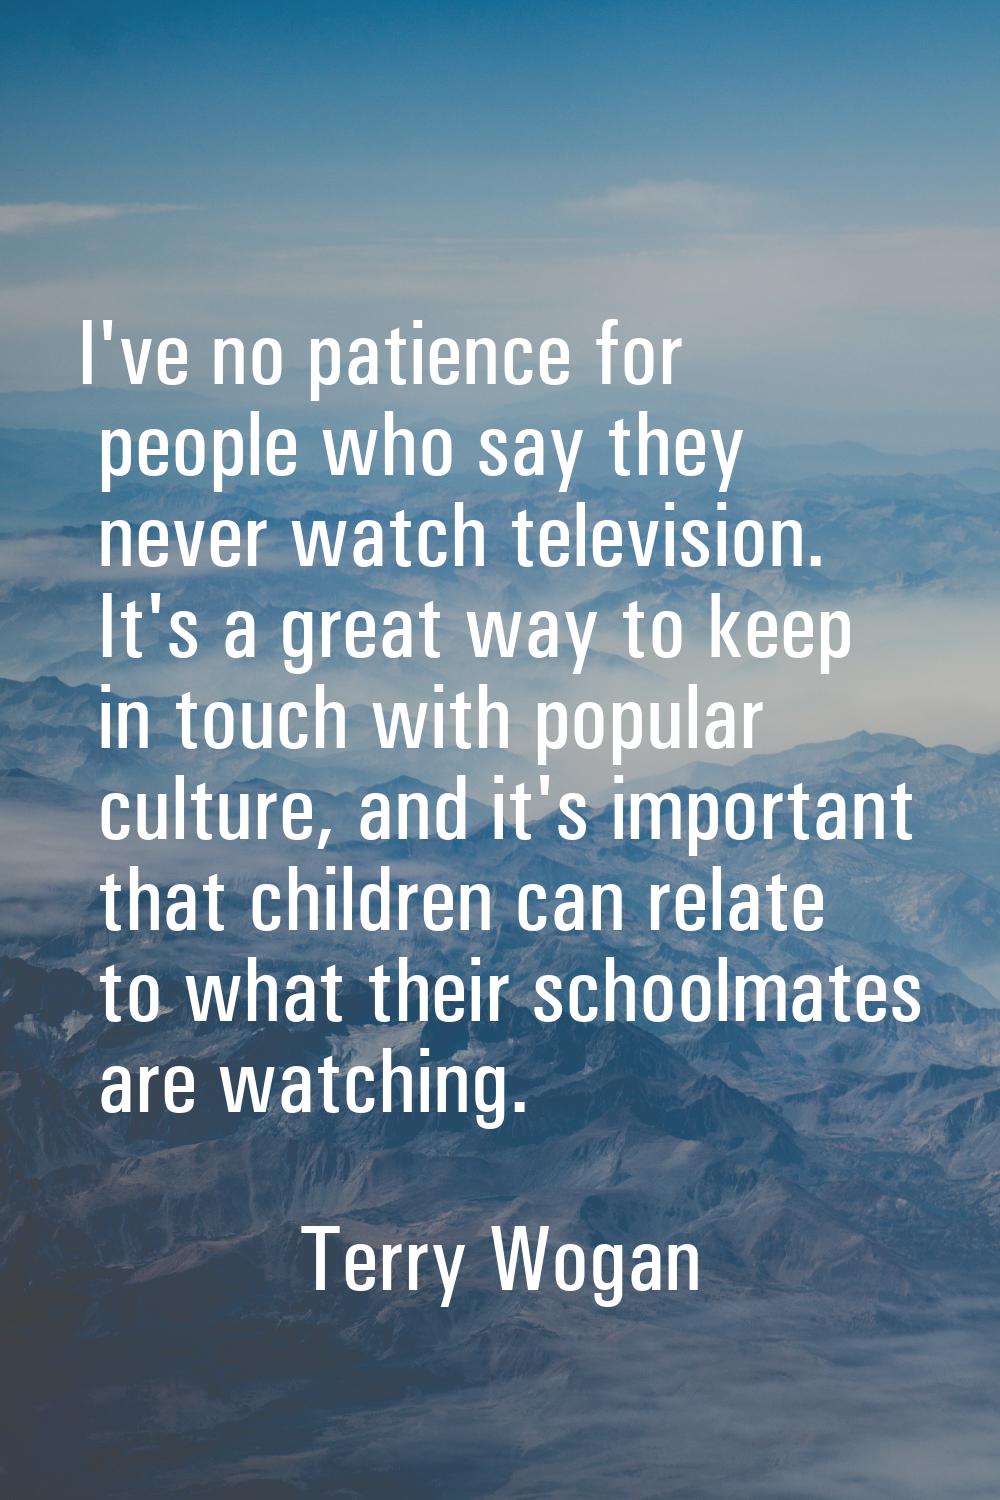 I've no patience for people who say they never watch television. It's a great way to keep in touch 